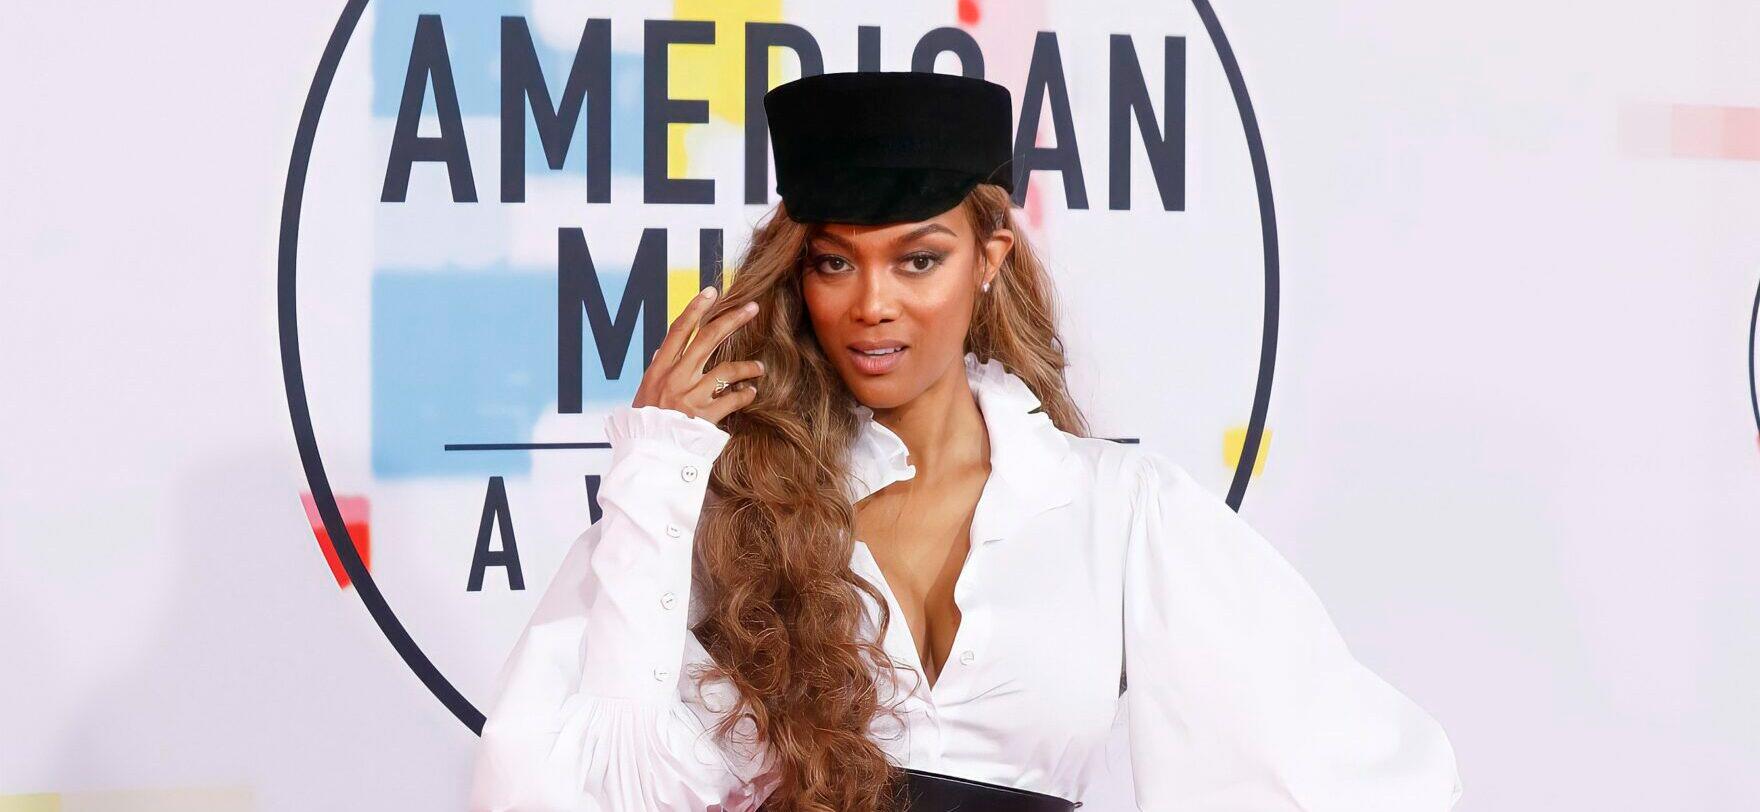 Tyra Banks Confirms She Is Quitting "Dancing With the Stars"